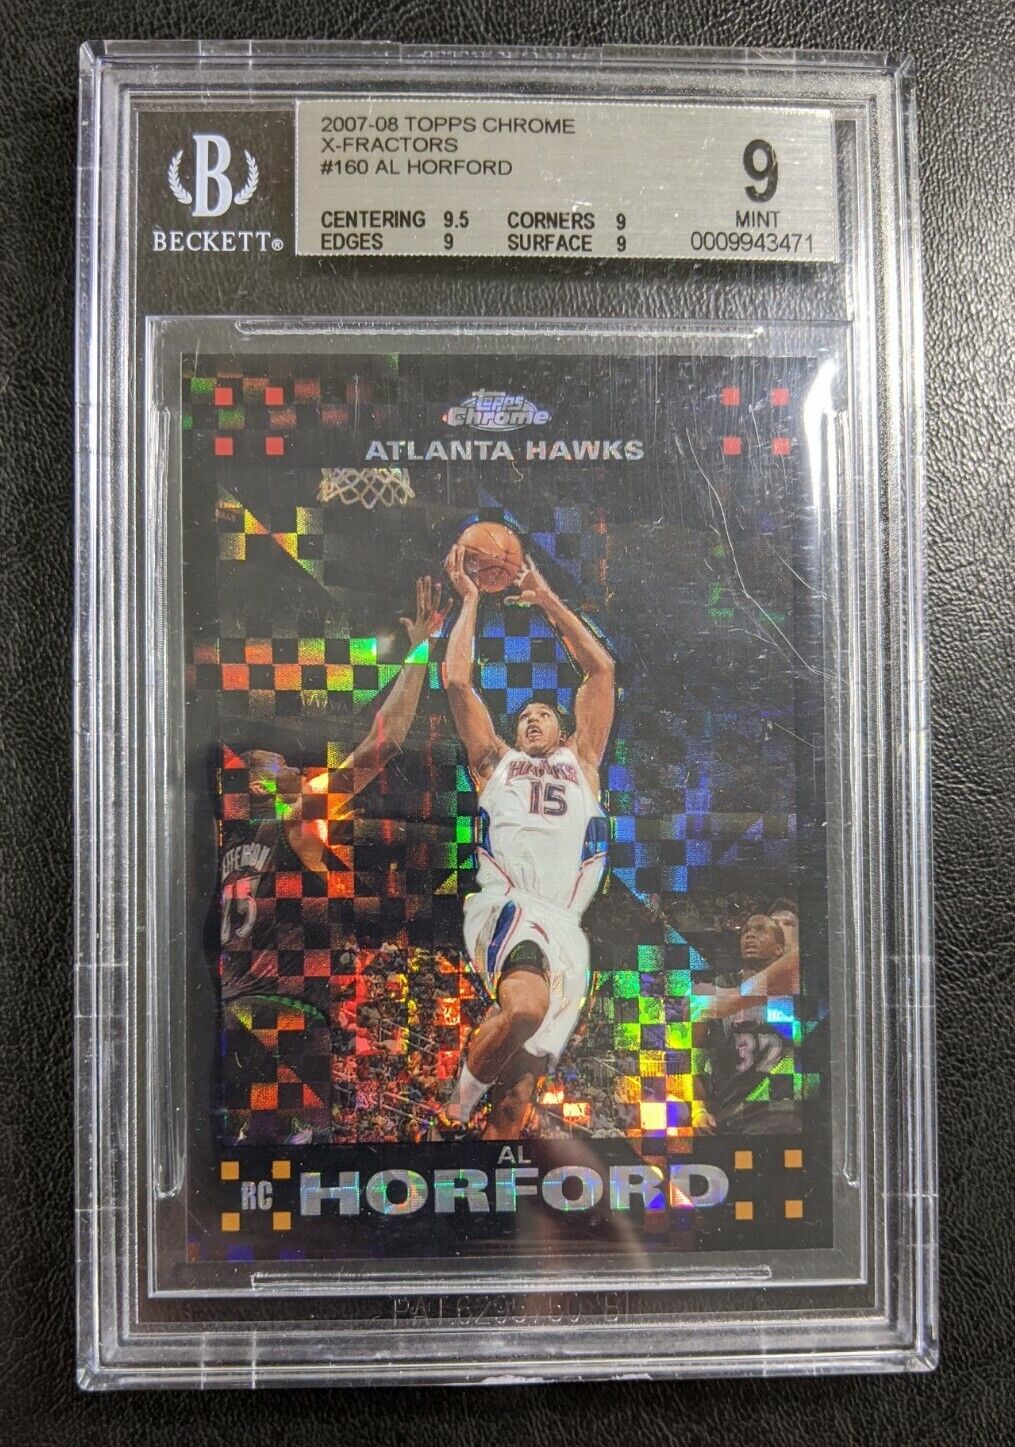 2007-08 Topps Chrome Al Horford RC X-Fractor /50 🔥 BGS 9 Rookie #160 Refractor